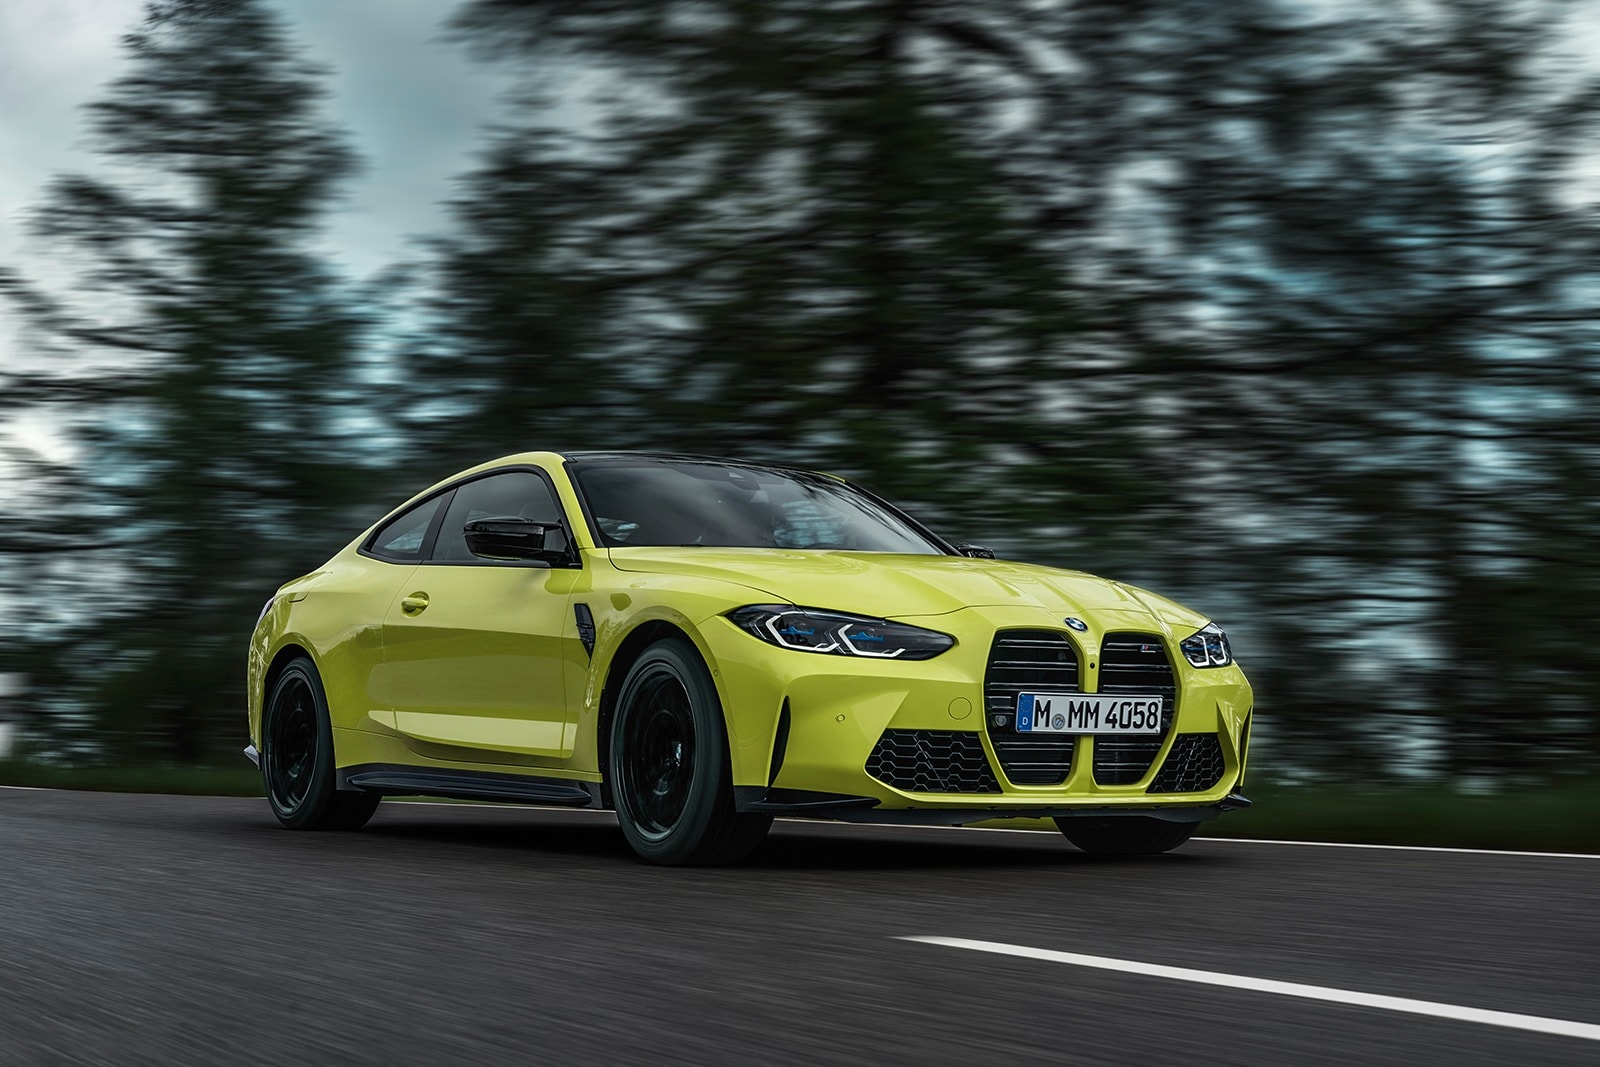 2021 BMW M4: We Drive BMW's New 503-hp Coupe